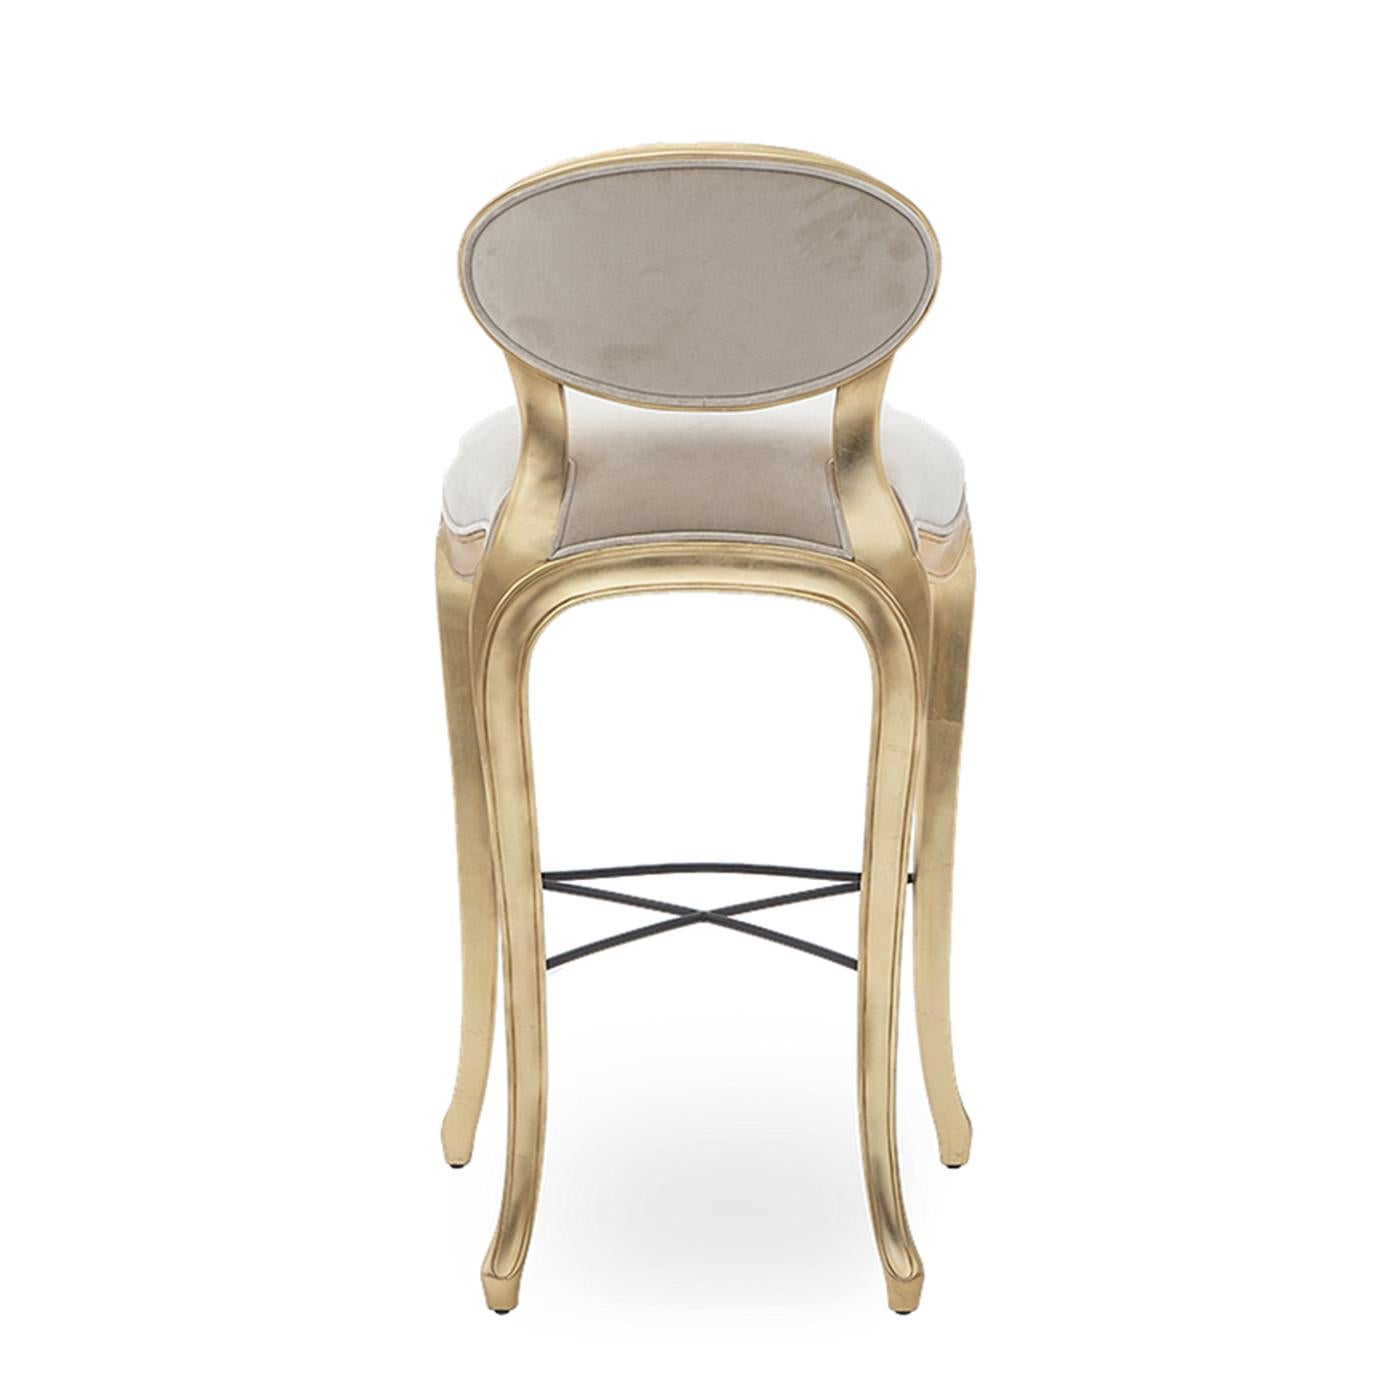 Hand-Crafted Flore Barstool